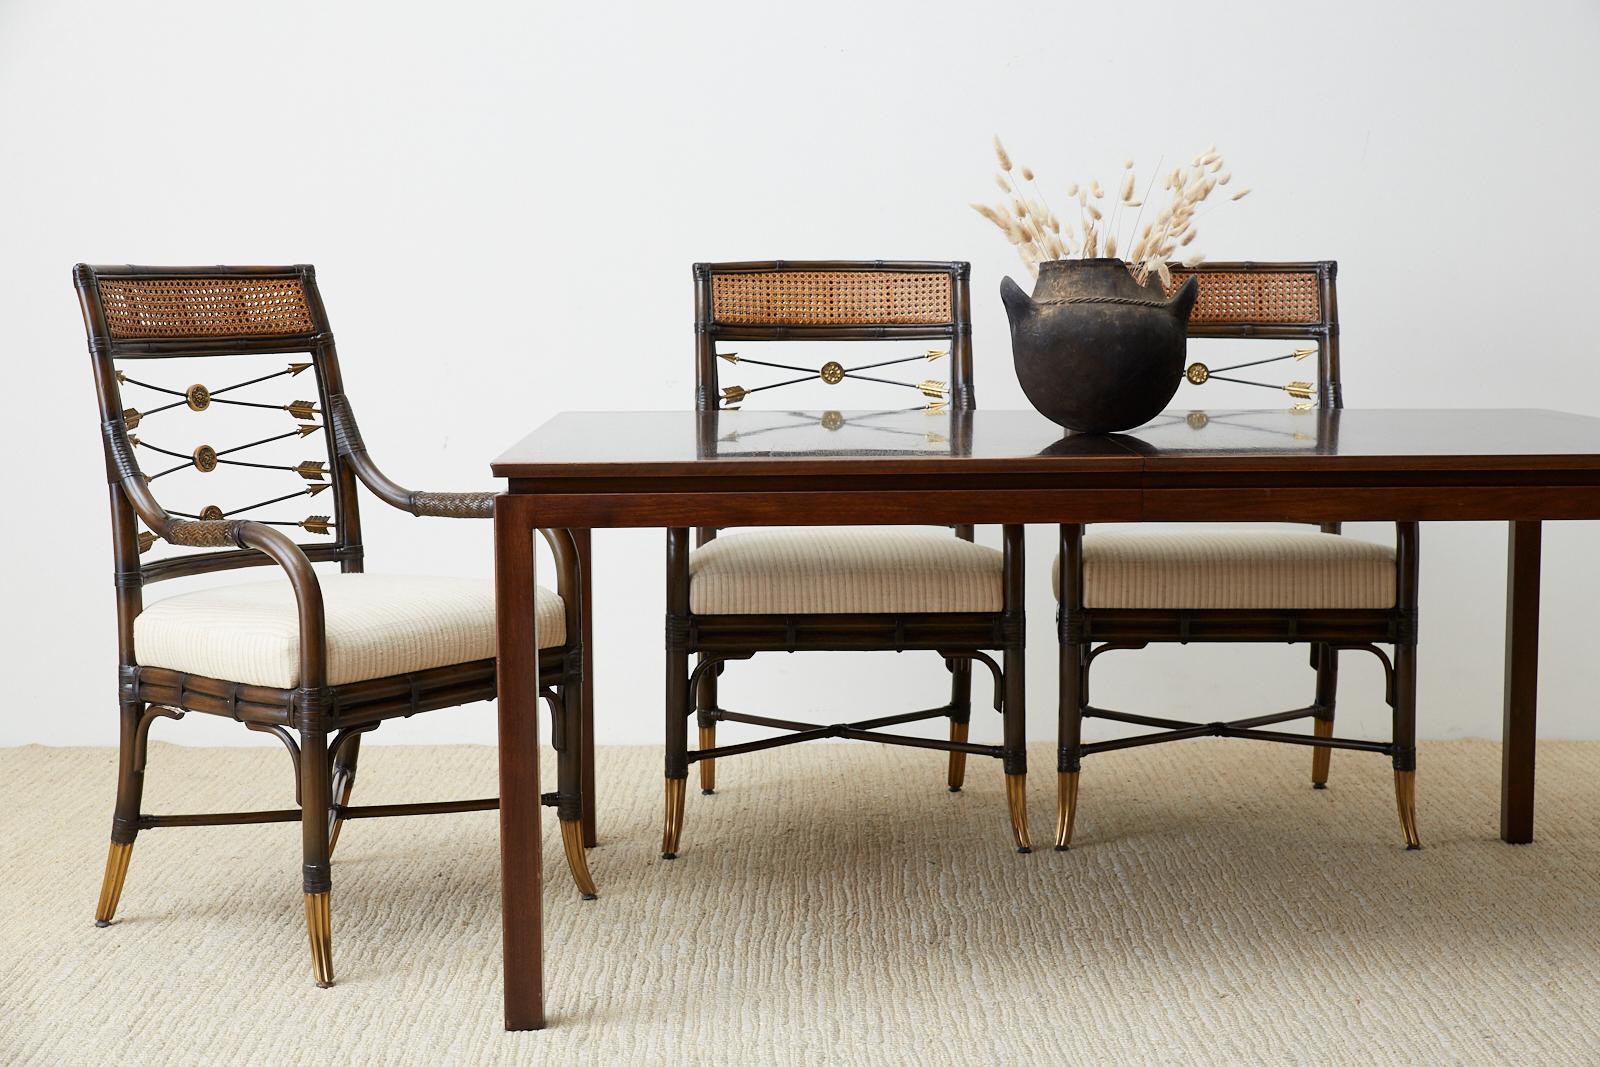 Mid-Century Modern dining table with two extending leaves designed by Edward Wormley for Dunbar. Constructed from mahogany featuring two finishes, one medium and one dark on top. The frame has sculpted legs with an Asian flare known as the Janus